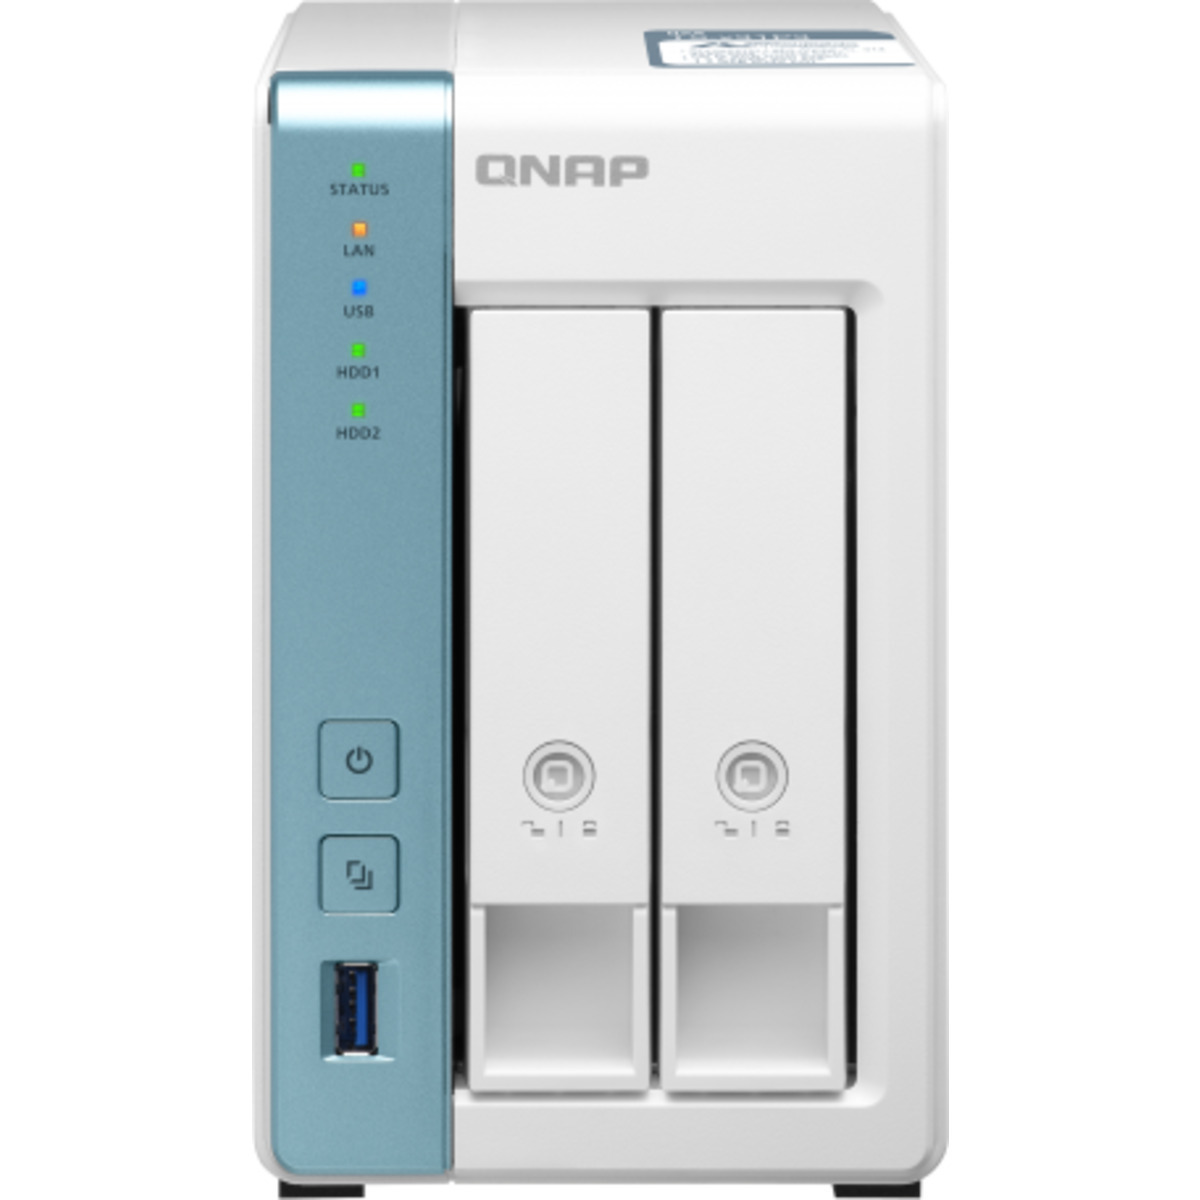 buy $692 QNAP TS-231P3 12tb Desktop NAS - Network Attached Storage Device 2x6000gb Western Digital Blue WD60EZAZ 3.5 5400rpm SATA 6Gb/s HDD CONSUMER Class Drives Installed - Burn-In Tested - FREE RAM UPGRADE - nas headquarters buy network attached storage server device das new raid-5 free shipping usa christmas new year holiday sale TS-231P3